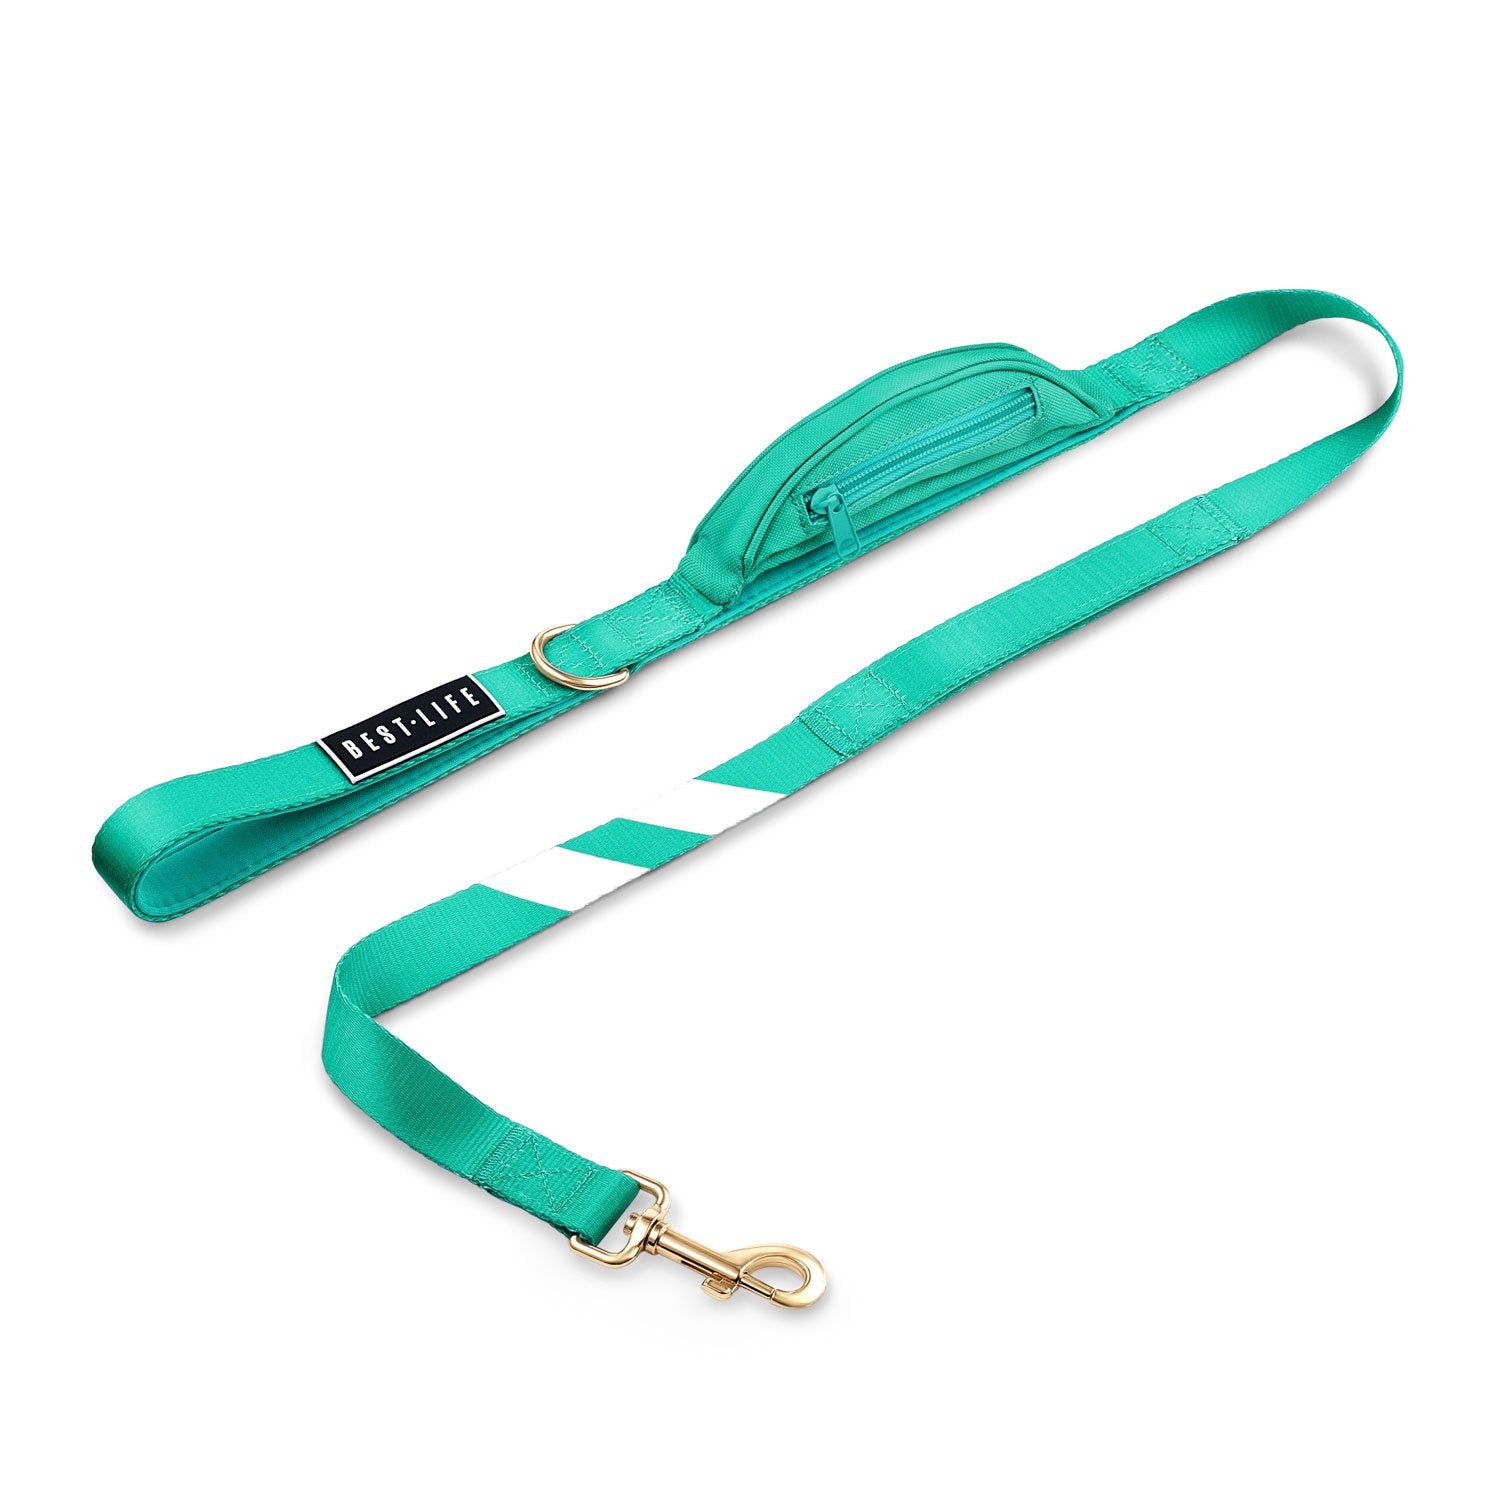 Real Teal - Cargo Leash 4ft